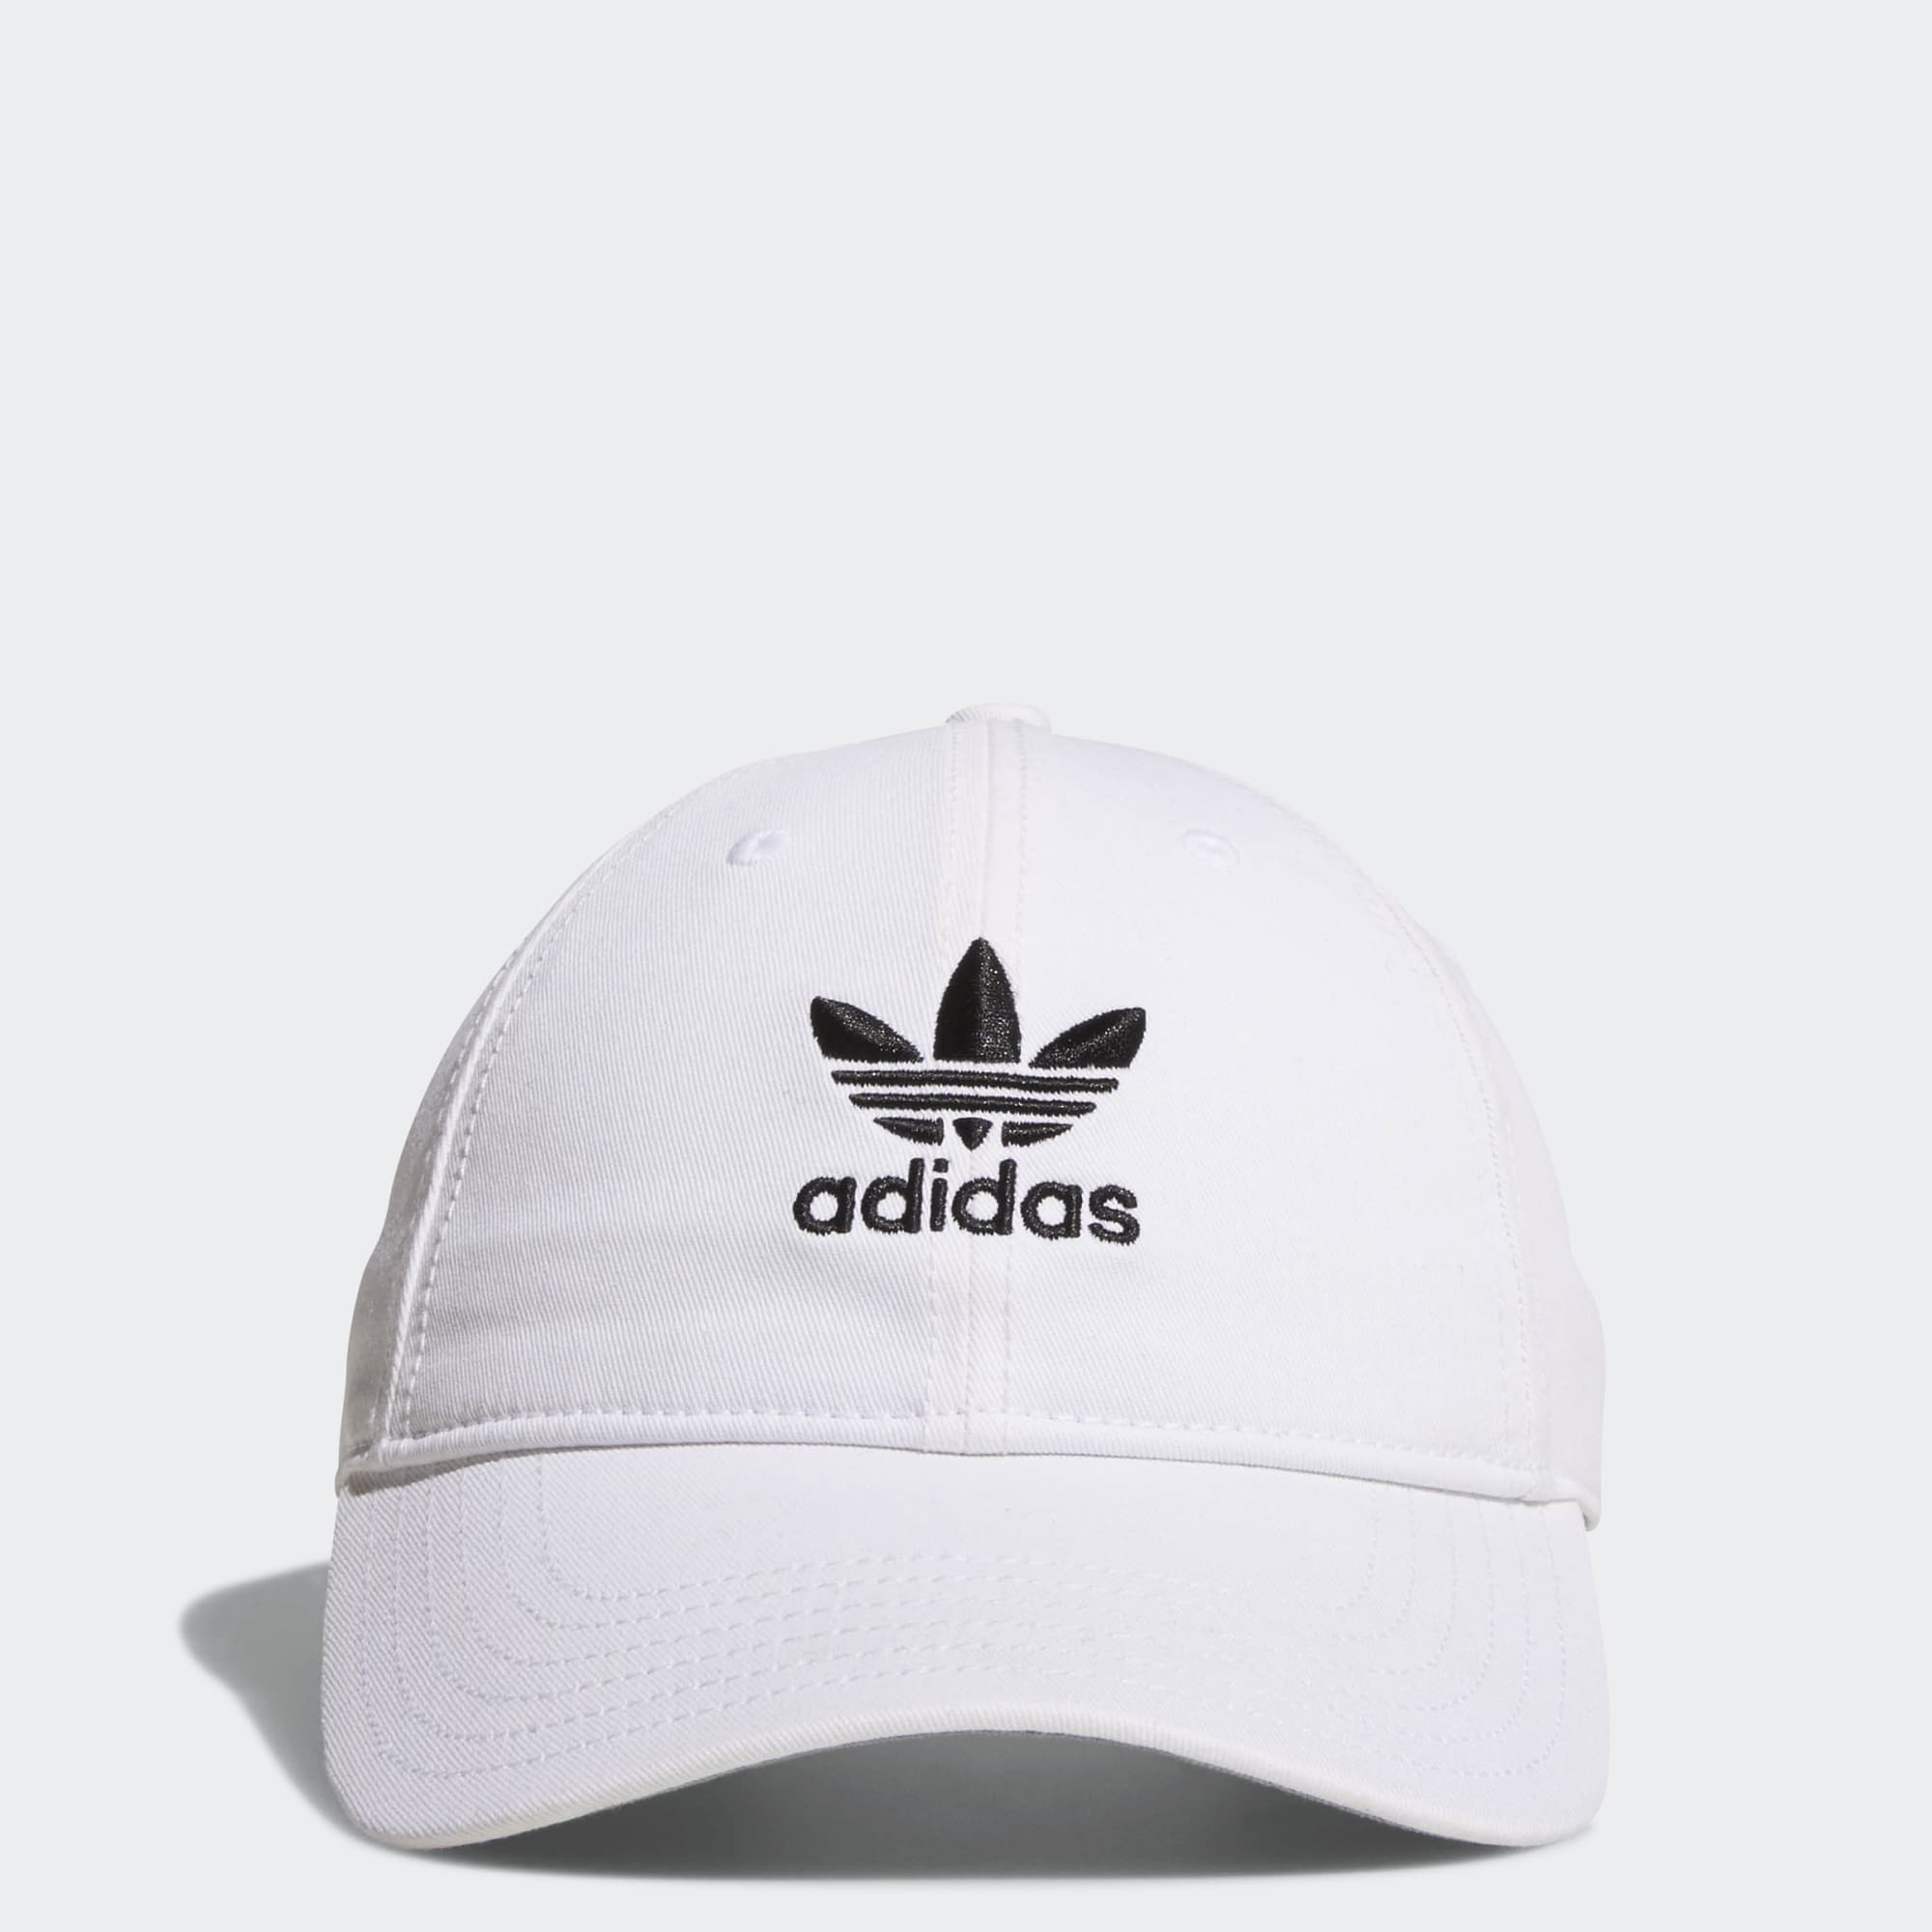 adidas Men's Relaxed Strap-Back Hat (Black or White) $10 + Free Shipping